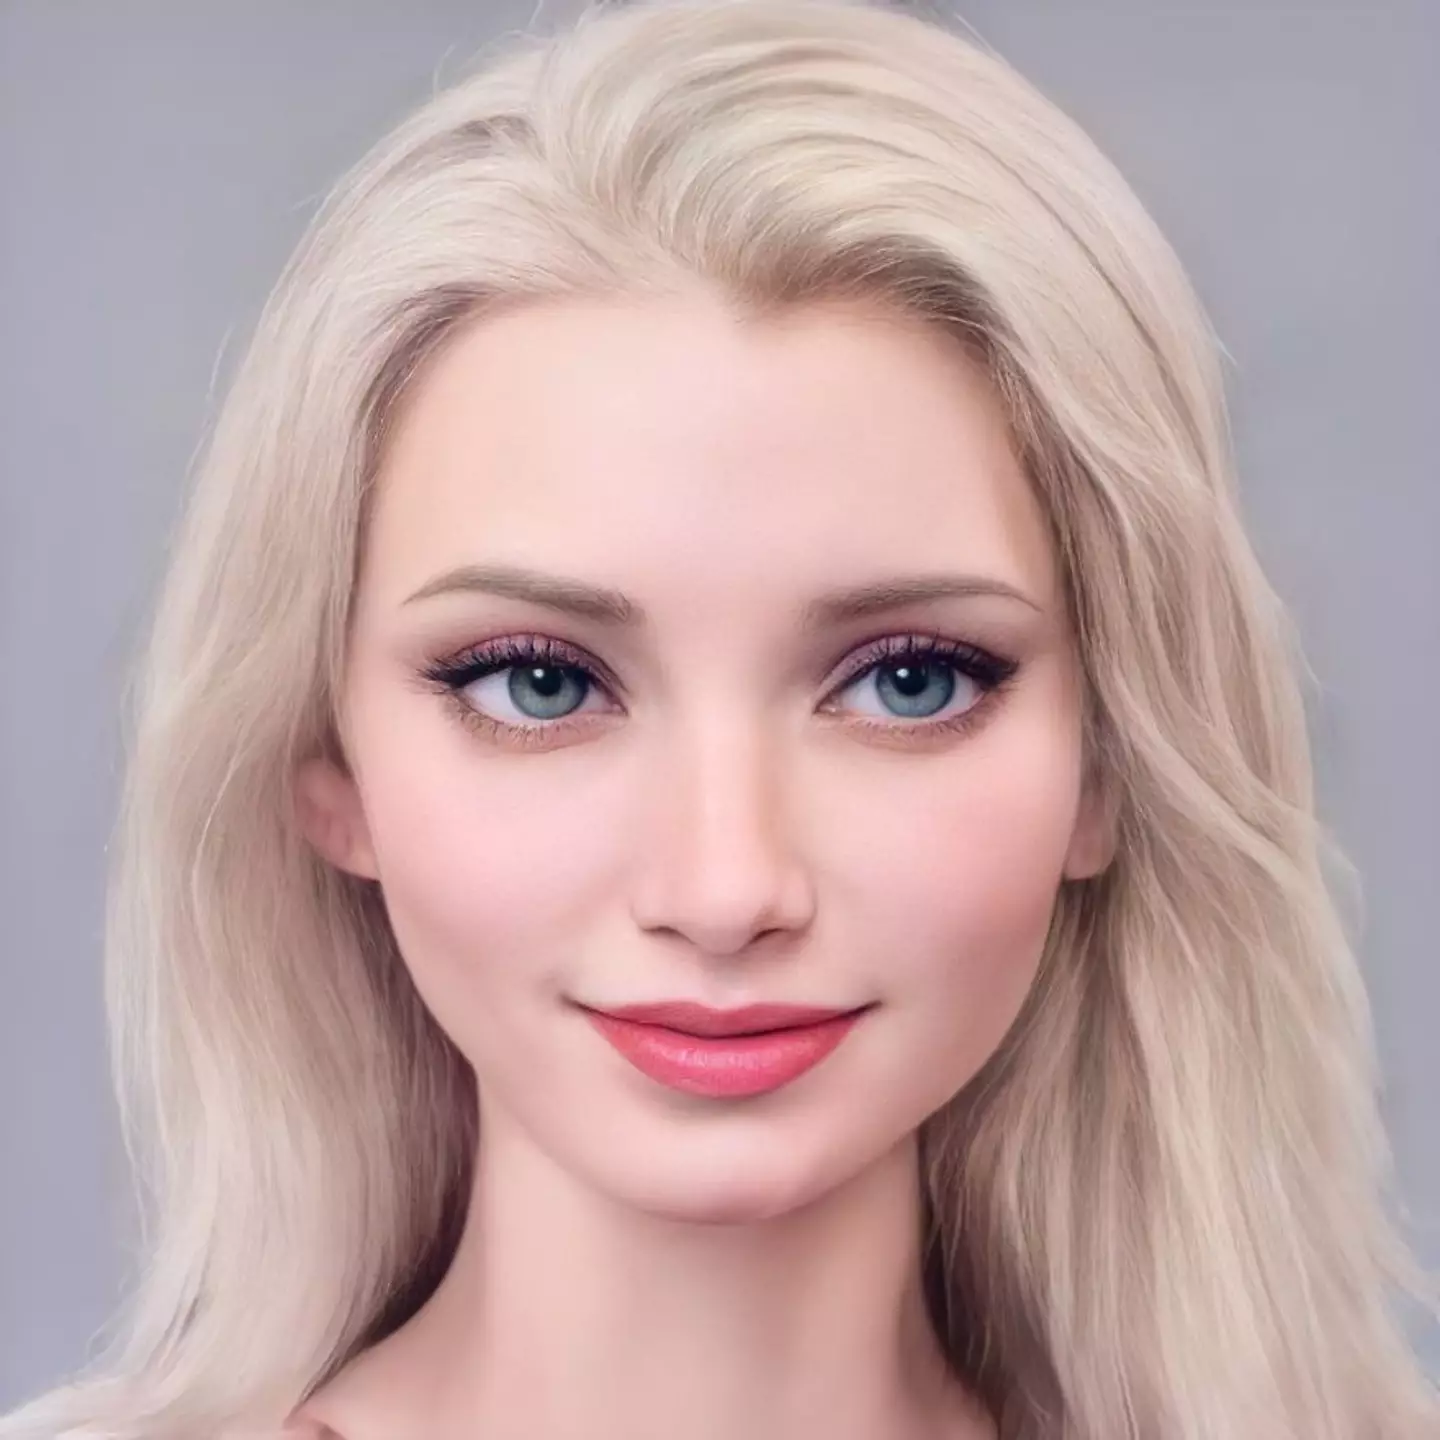 The artist used AI and their own skill to create a real life version of Elsa from Frozen.